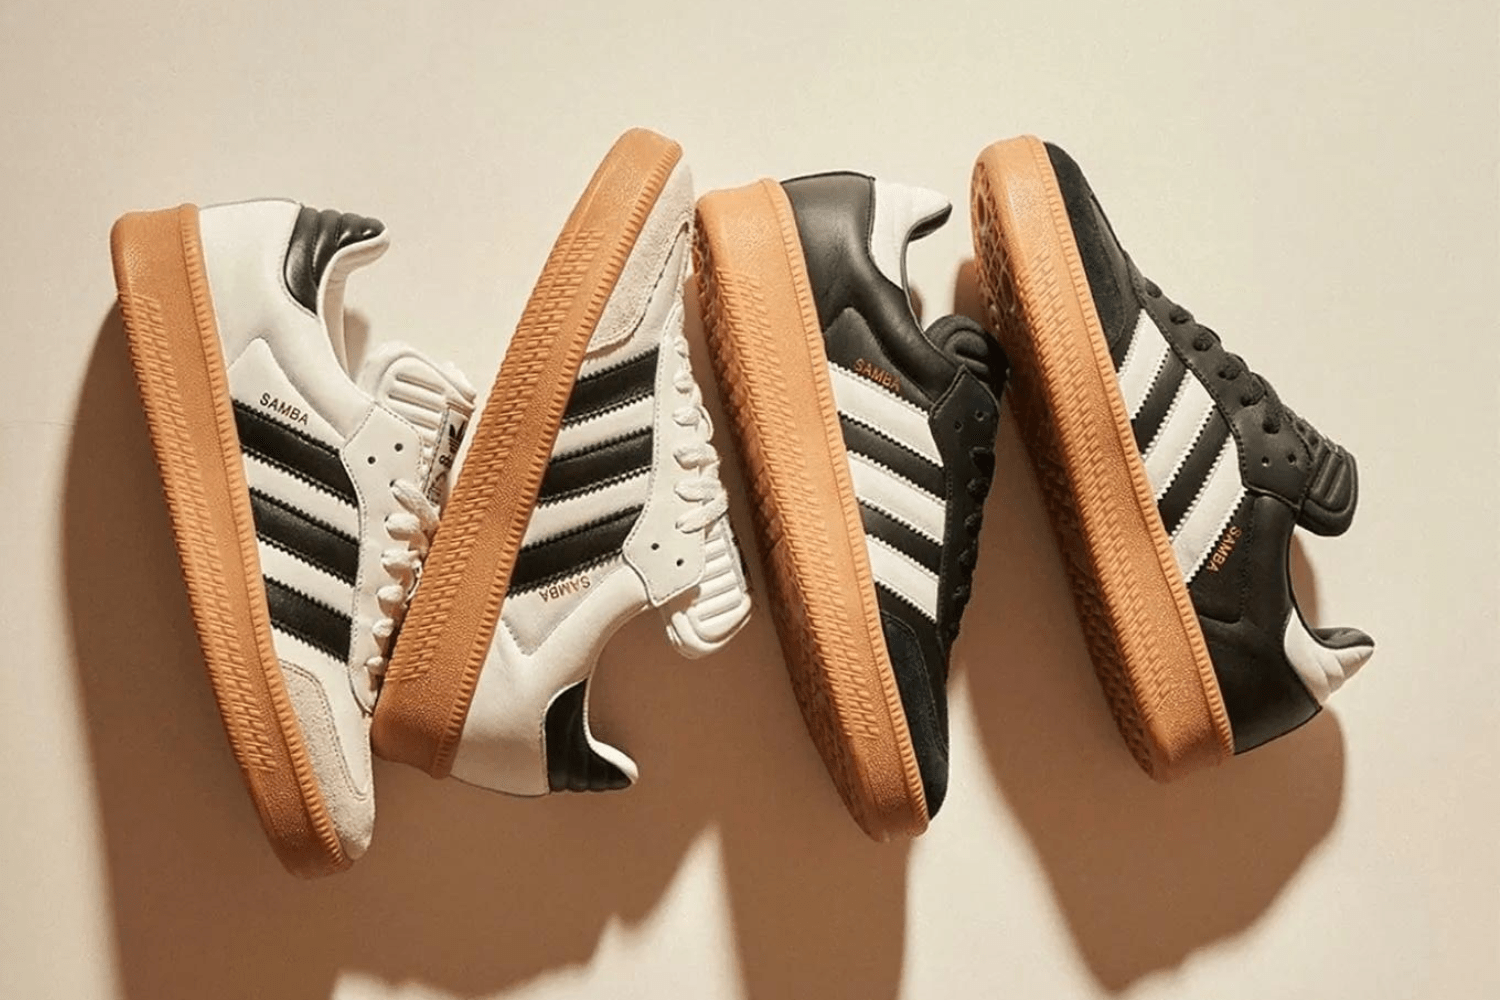 The adidas Samba XLG arrives in two OG colorways